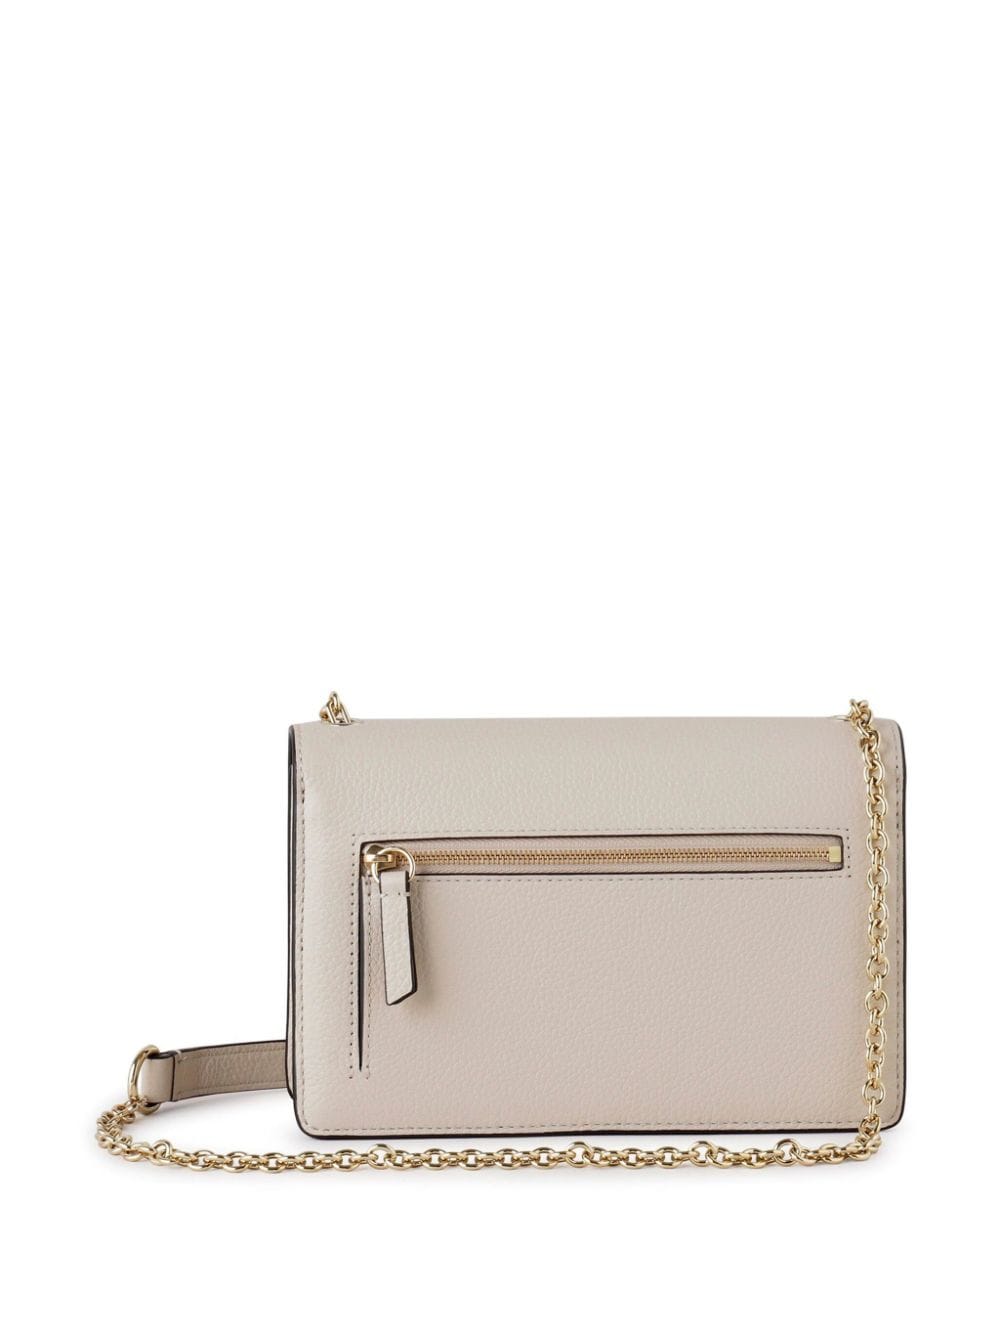 Shop Mulberry Small Darley Leather Shoulder Bag In Neutrals